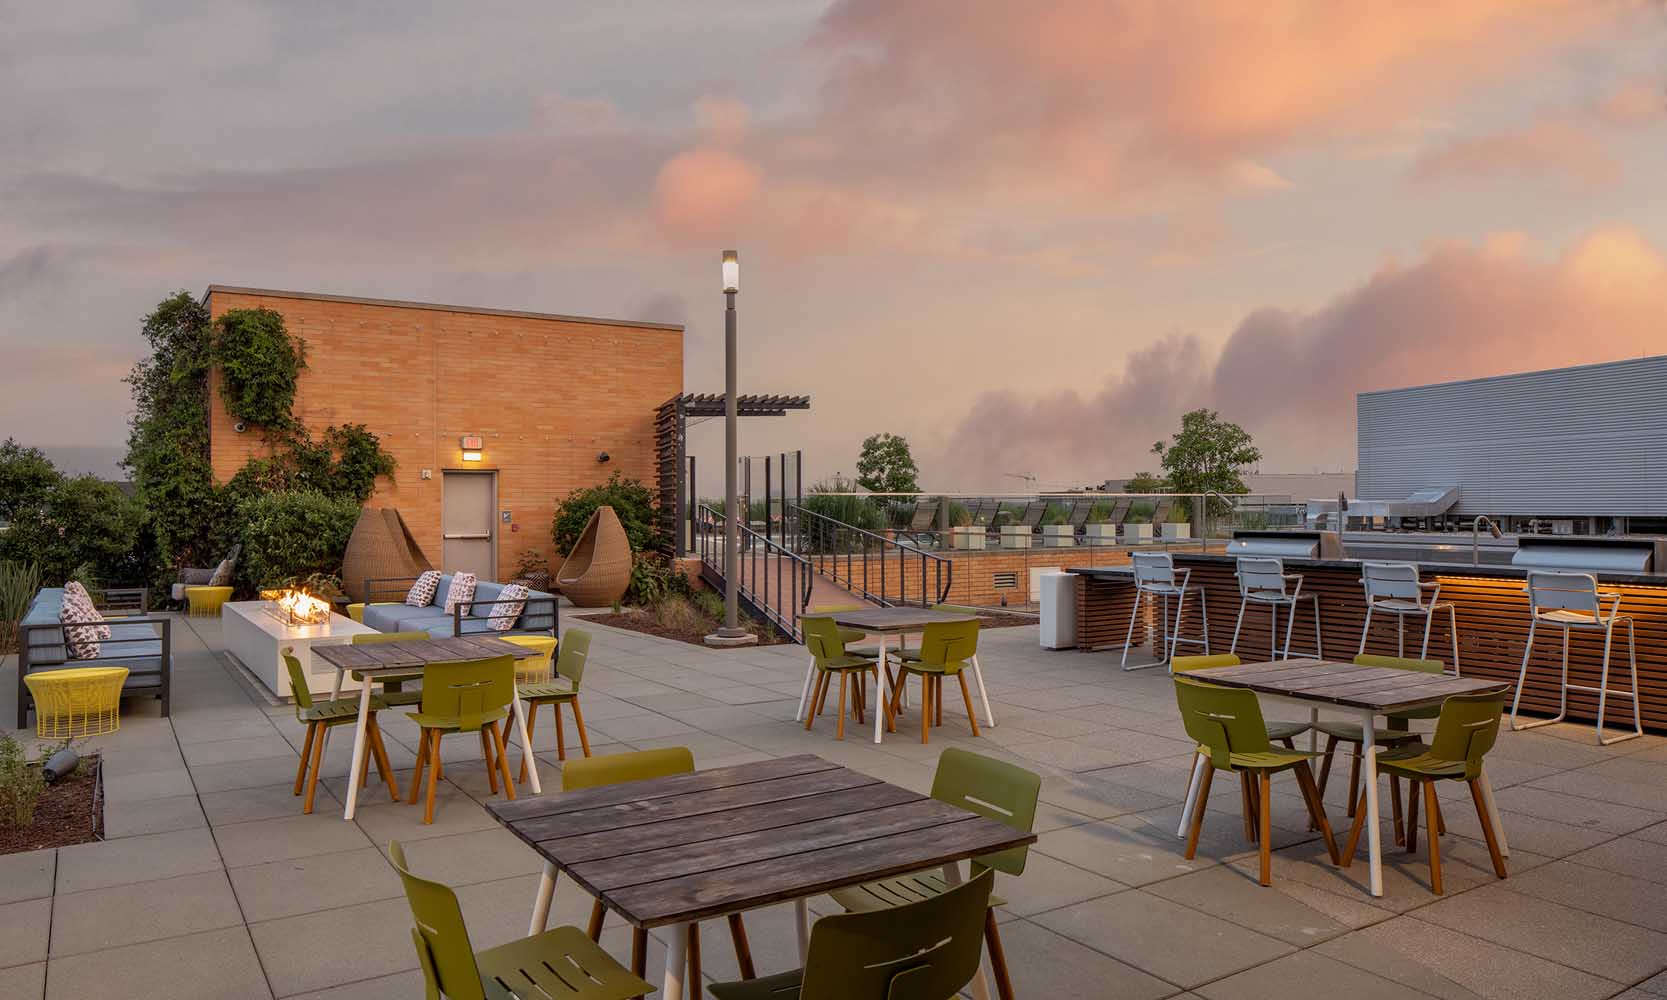 An expansive rooftop sun deck featuring sitting areas and tables for dining